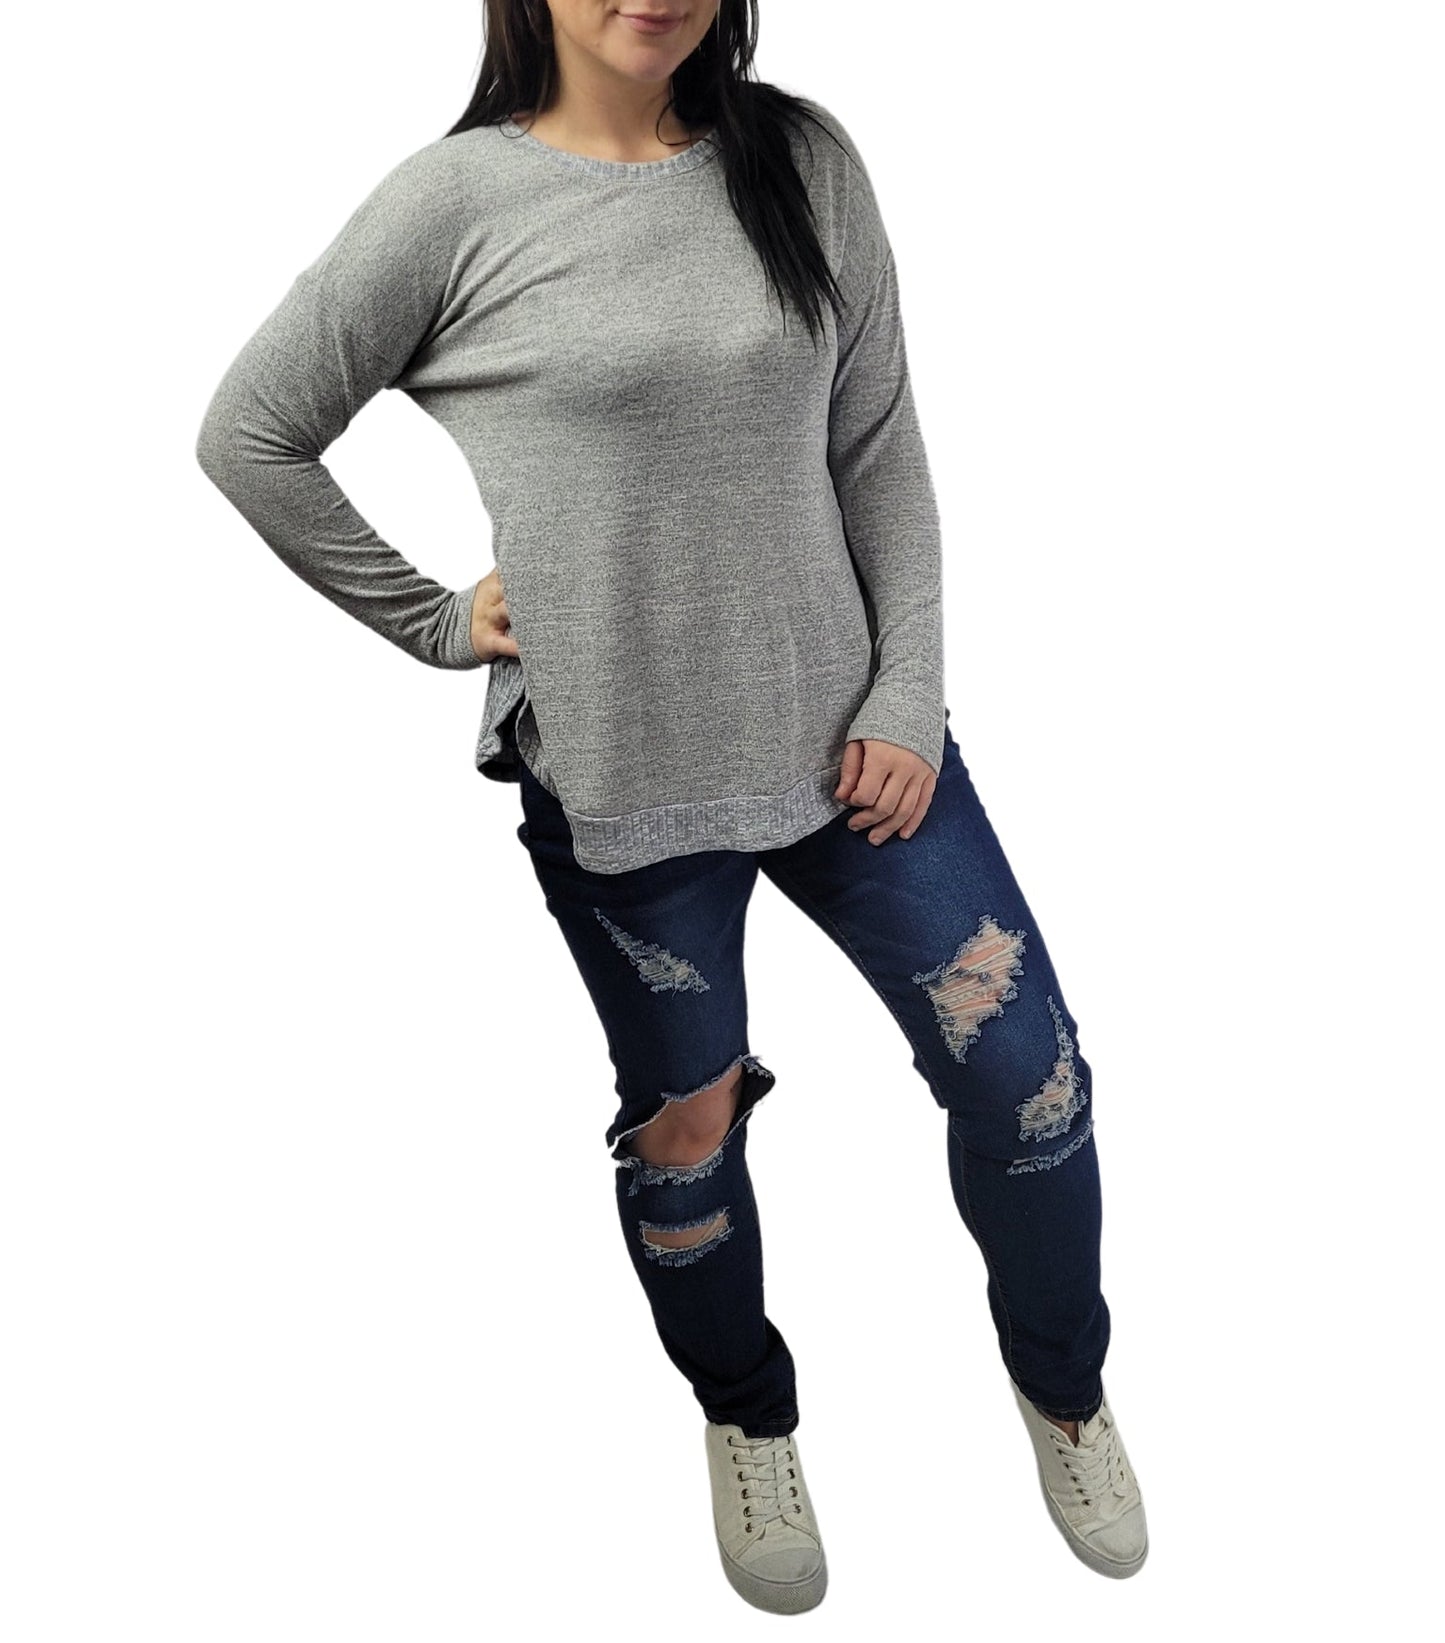 CHILLI Grey Fashion Long Sleeve Button Top Top Aambers Goodies xx 